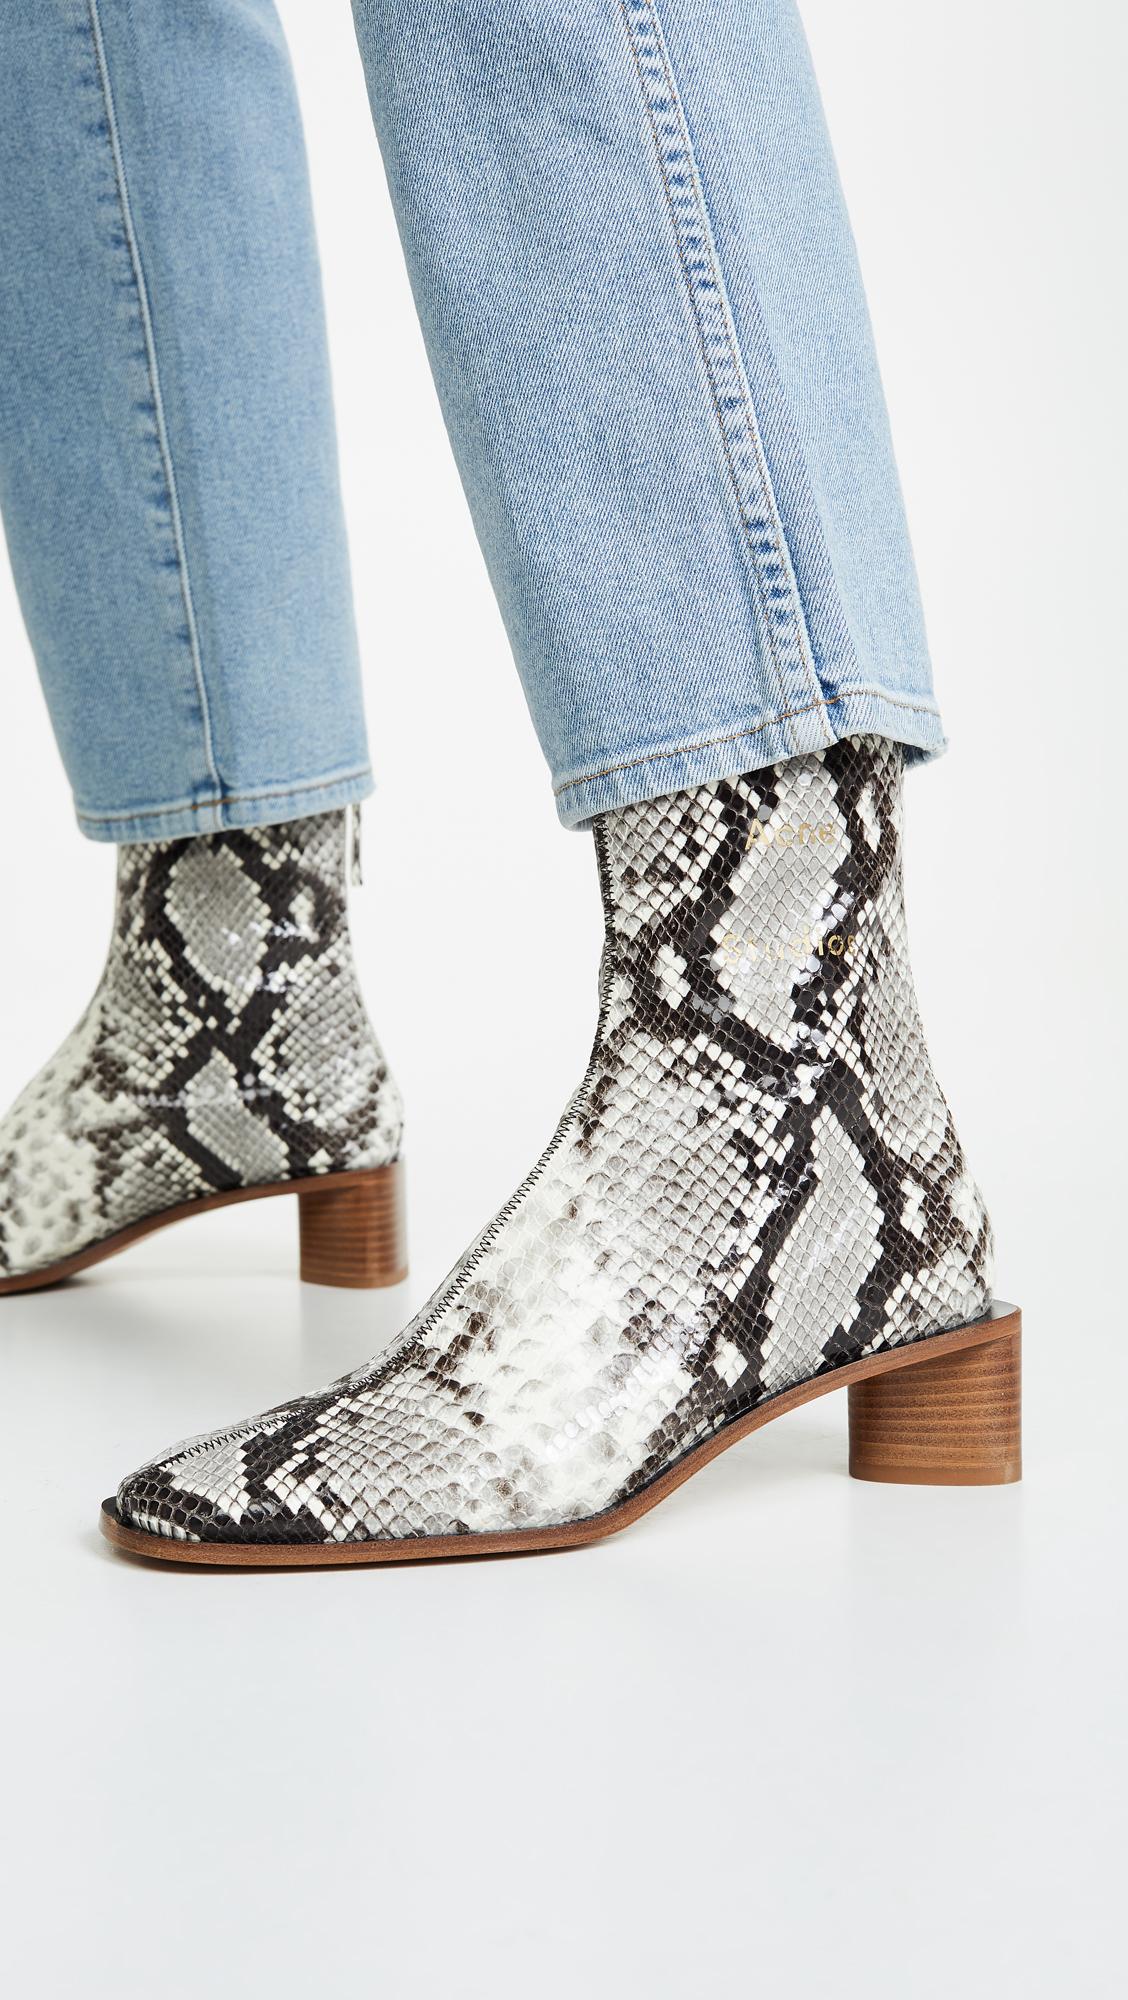 Acne Studios Leather Bertine Snake Booties in White/Beige (White) - Lyst